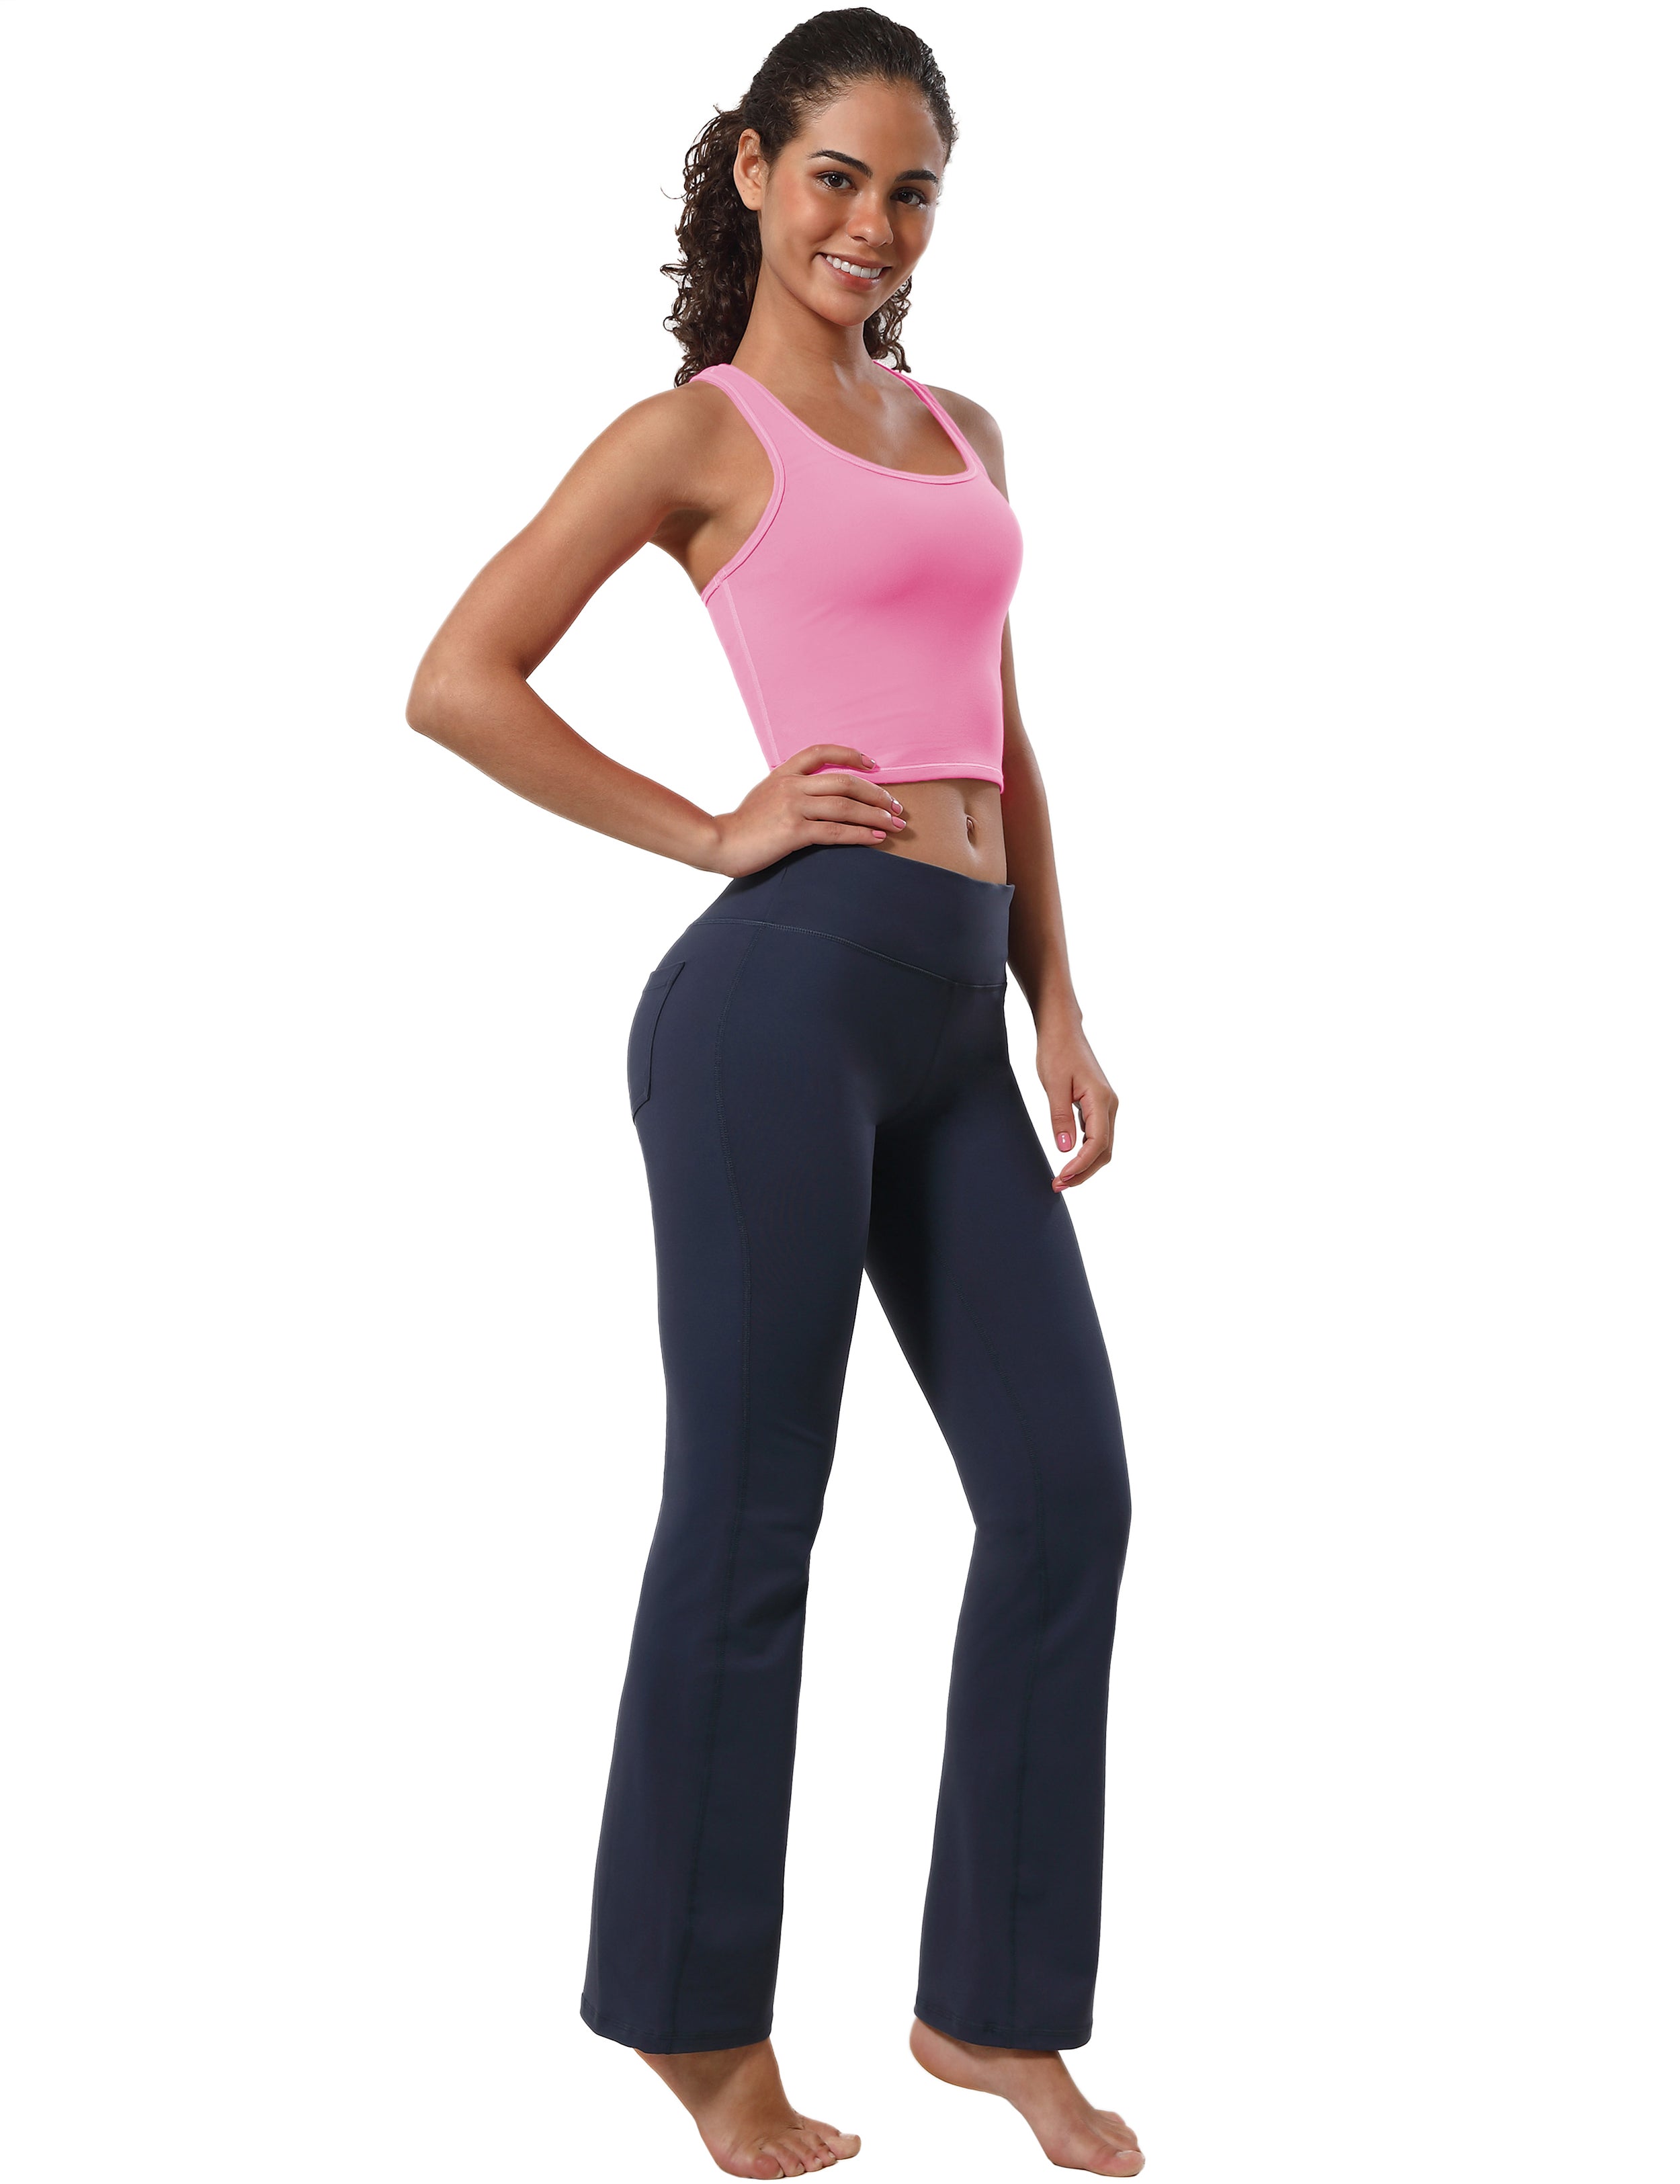 Racerback Athletic Crop Tank Tops lightpink 92%Nylon/8%Spandex(Cotton Soft) Designed for Pilates Tight Fit So buttery soft, it feels weightless Sweat-wicking Four-way stretch Breathable Contours your body Sits below the waistband for moderate, everyday coverage